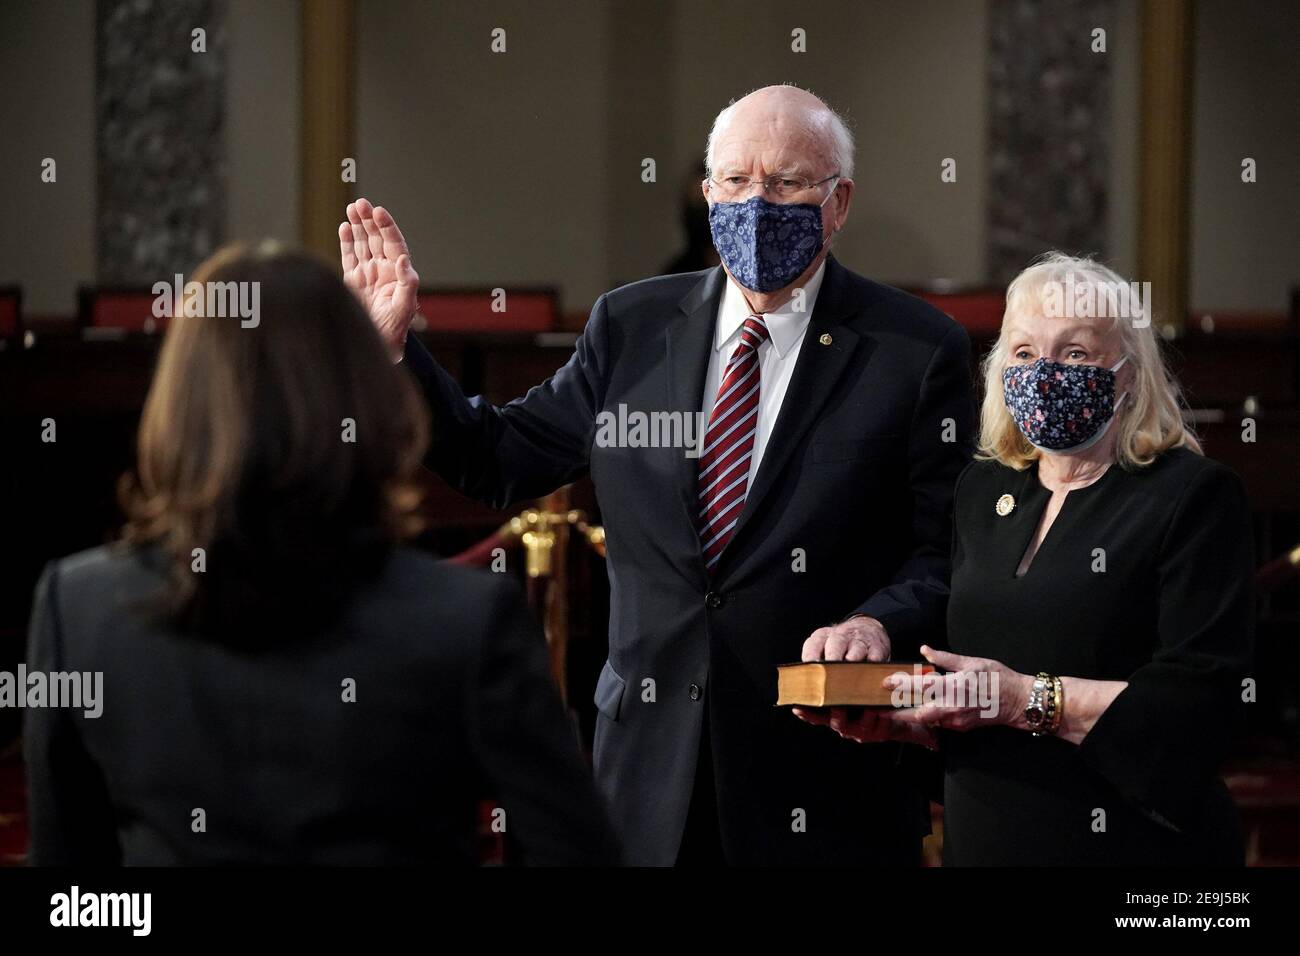 Sen. Patrick Leahy (D-Vt.) participates in a ceremonial swearing in photo op with his wife Marcelle Pomerleau and Vice President Harris on Thursday, February 4, 2021 in the Old Senate Chamber at the U.S. Capitol in Washington, DC.Credit: Greg Nash/Pool via CNP | usage worldwide Stock Photo